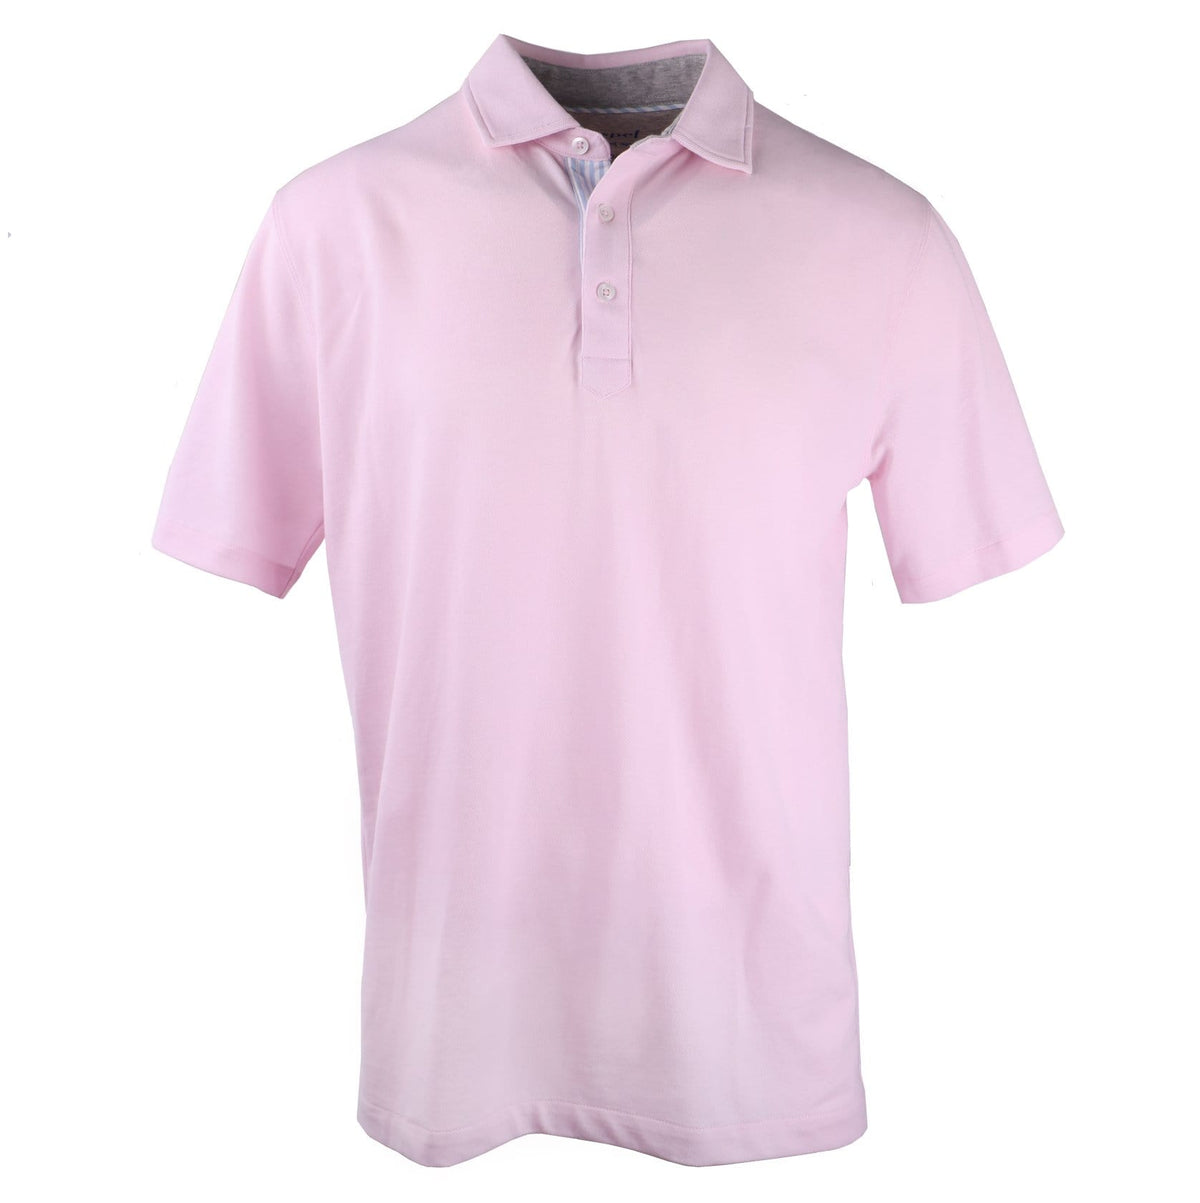 Fulton Pink Stretch Pique PoloThe softest pique polo to ever drape your statuesque torso. Enjoy that future perma-grin as you experience the touch and feel of a shirt that&#39;s simple in nature but exudes the quality of a Haspel man.  Our Signature Seersucker Piping and Placket • 3 Button Placket • Open Sleeve • Tagless/Printed Label for Ultimate Comfort • Stretch Comfort • 60% Cotton / 40% Polyester • Machine Washable • Return Policy